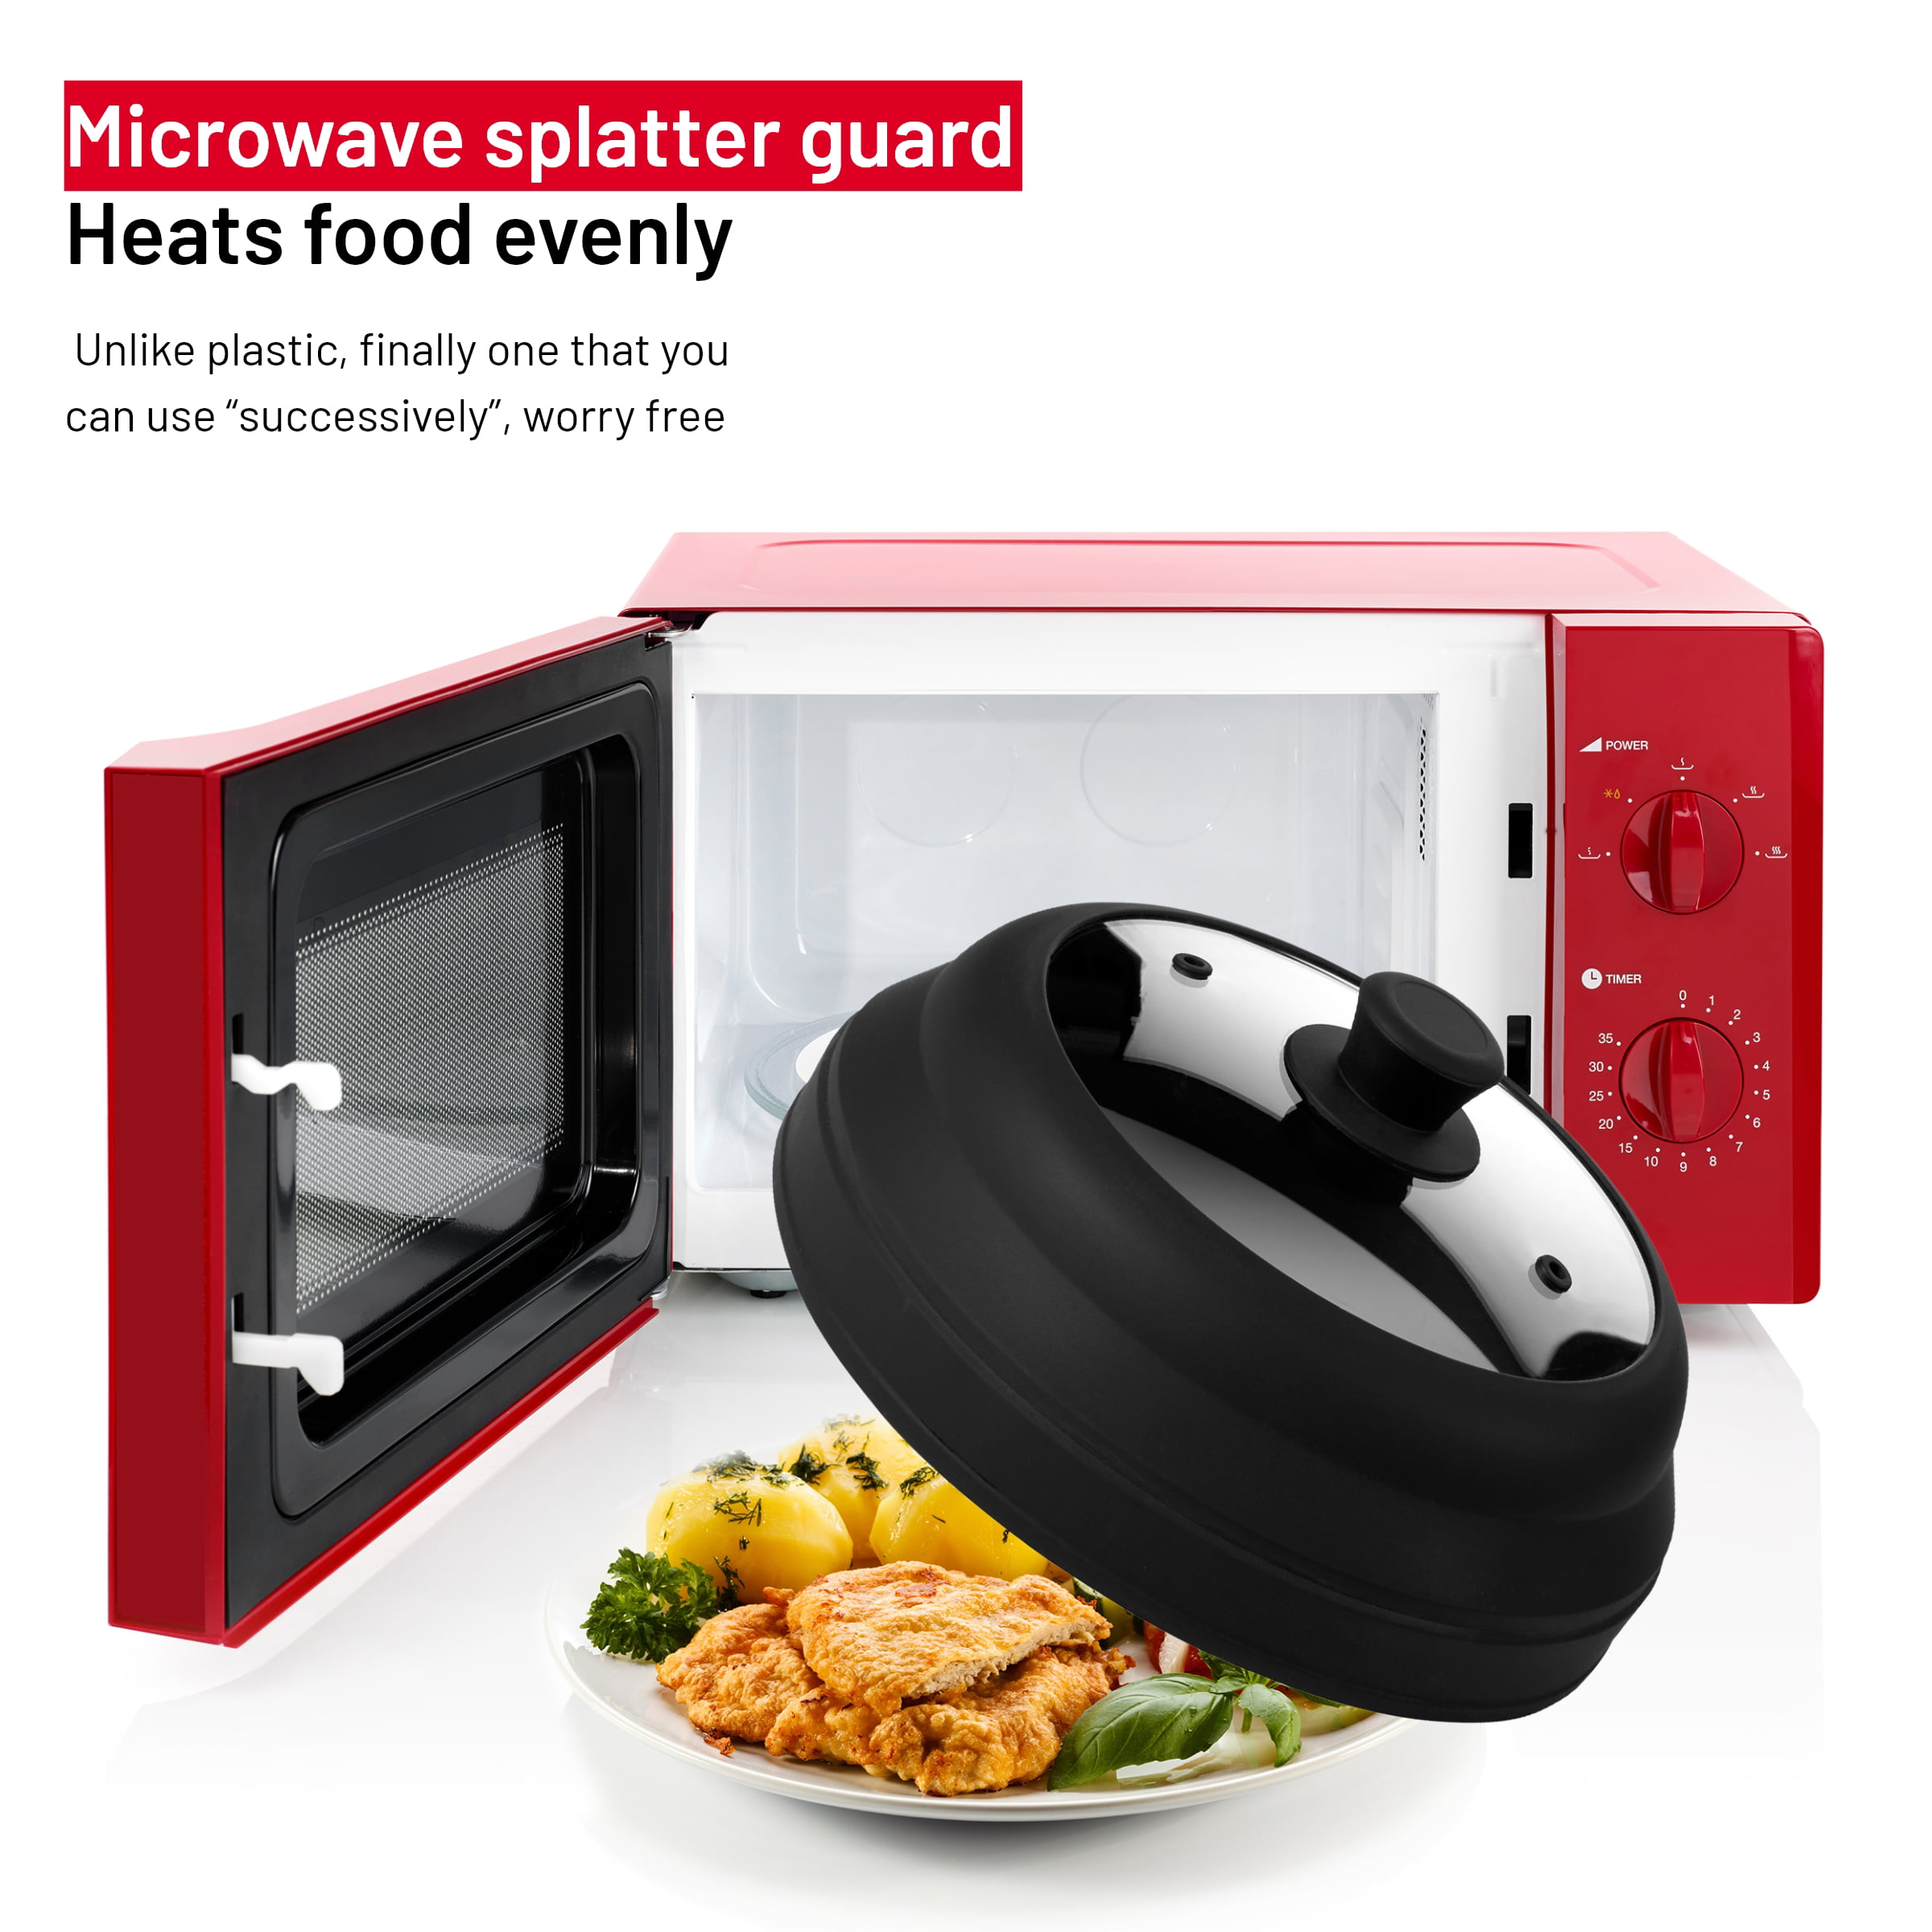 Microwave Food Cover Splatter Proof Vented Collapsible With Easy Grip Hand